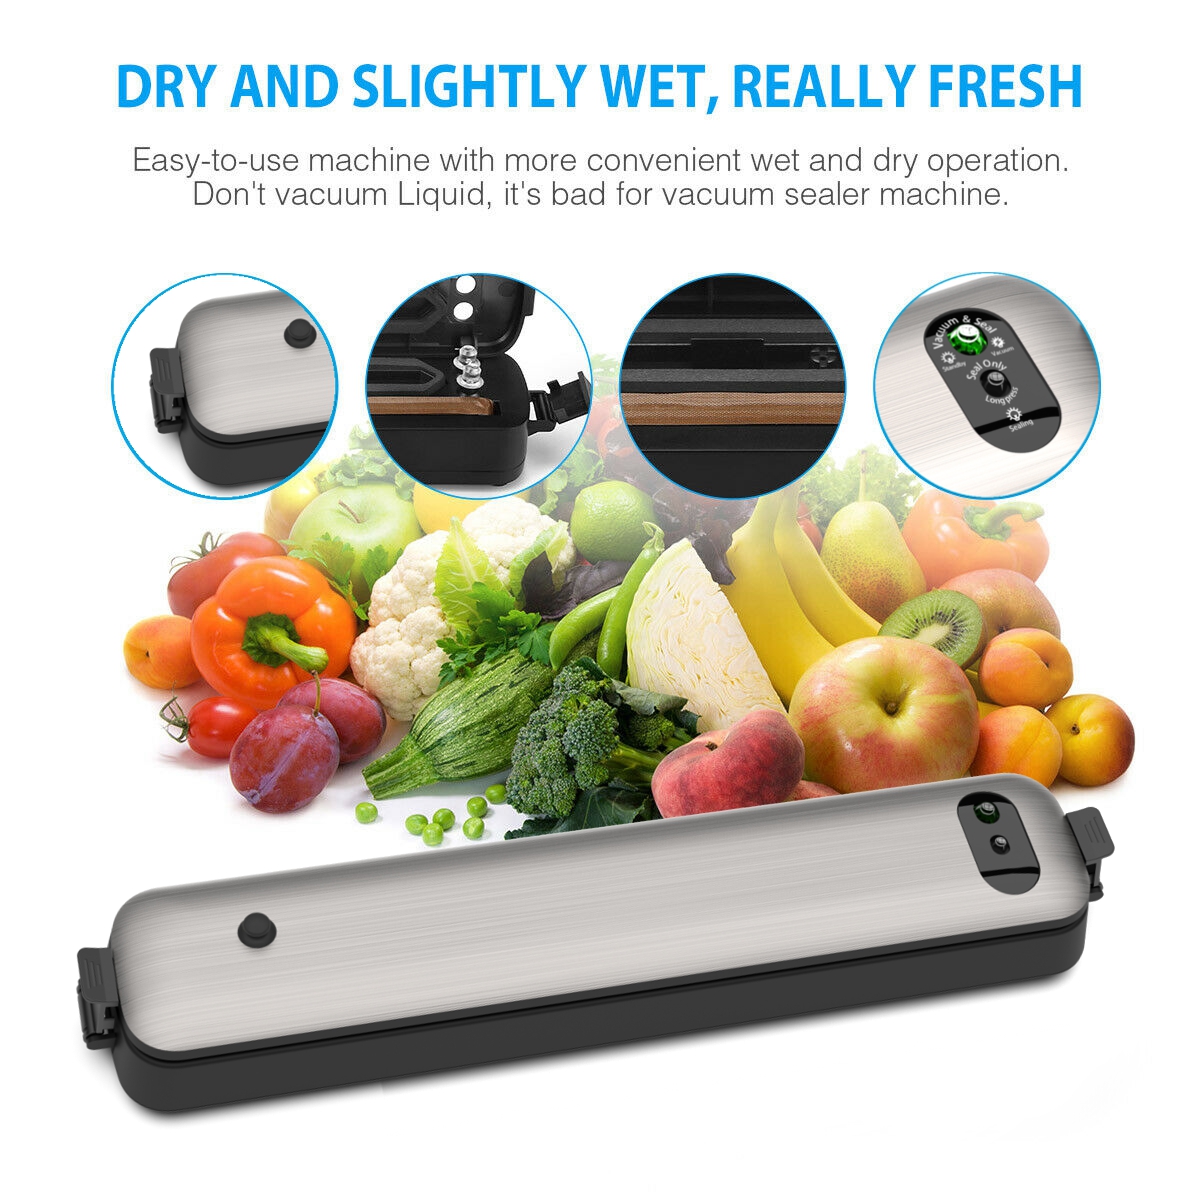 Household-Vacuum-Sealer-Machine-Seal-Meal-Food-Vacuum-Sealer-System-with-15-Free-Bags-One-Touch-Cont-1938046-6